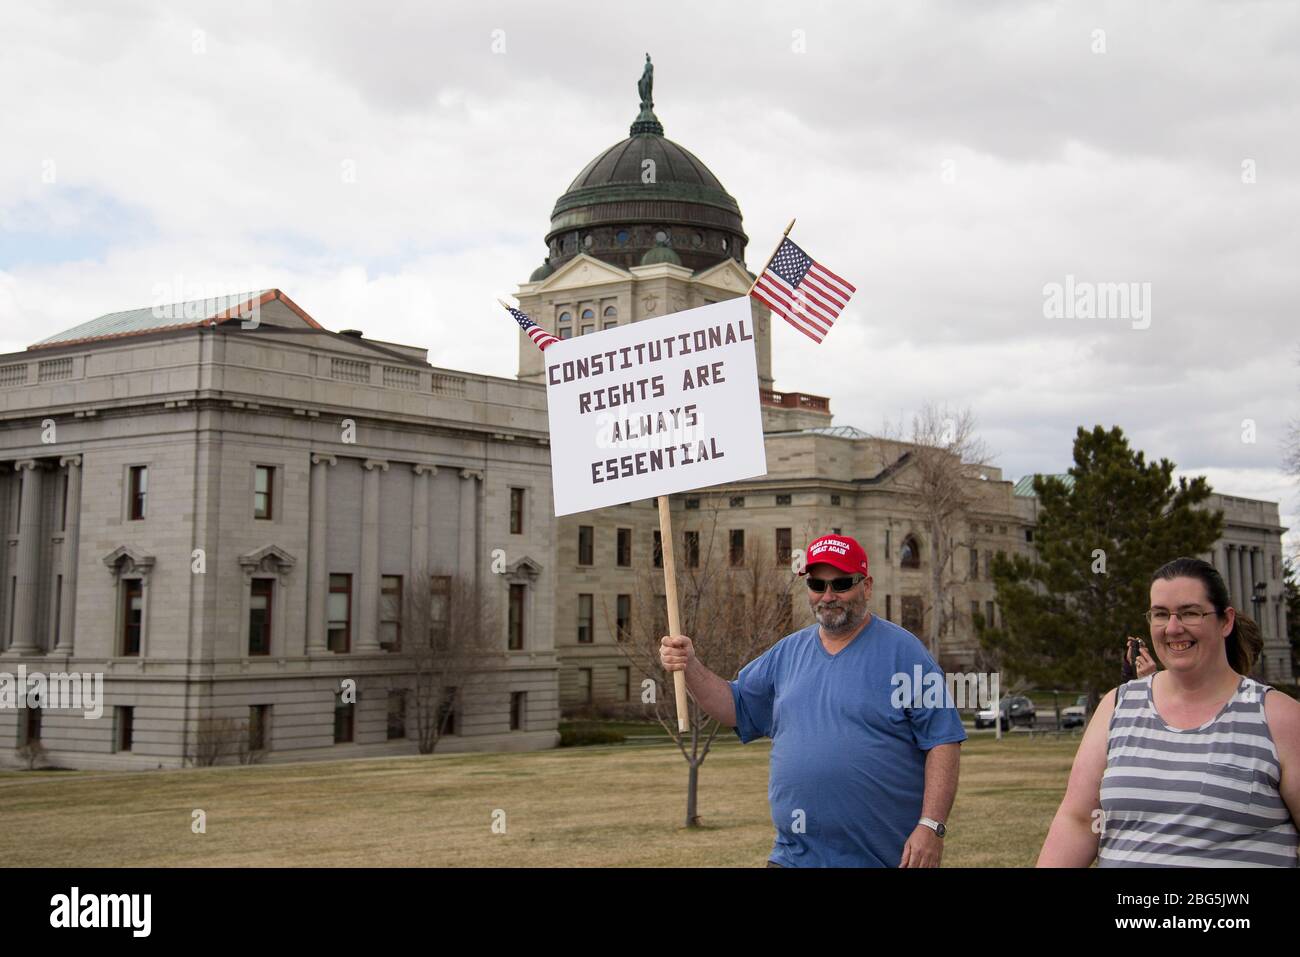 Helena, Montana - April 19, 2020: Man protesting wearing Make America Great Again hat holding constitutional rights are essential sign at a protest ag Stock Photo